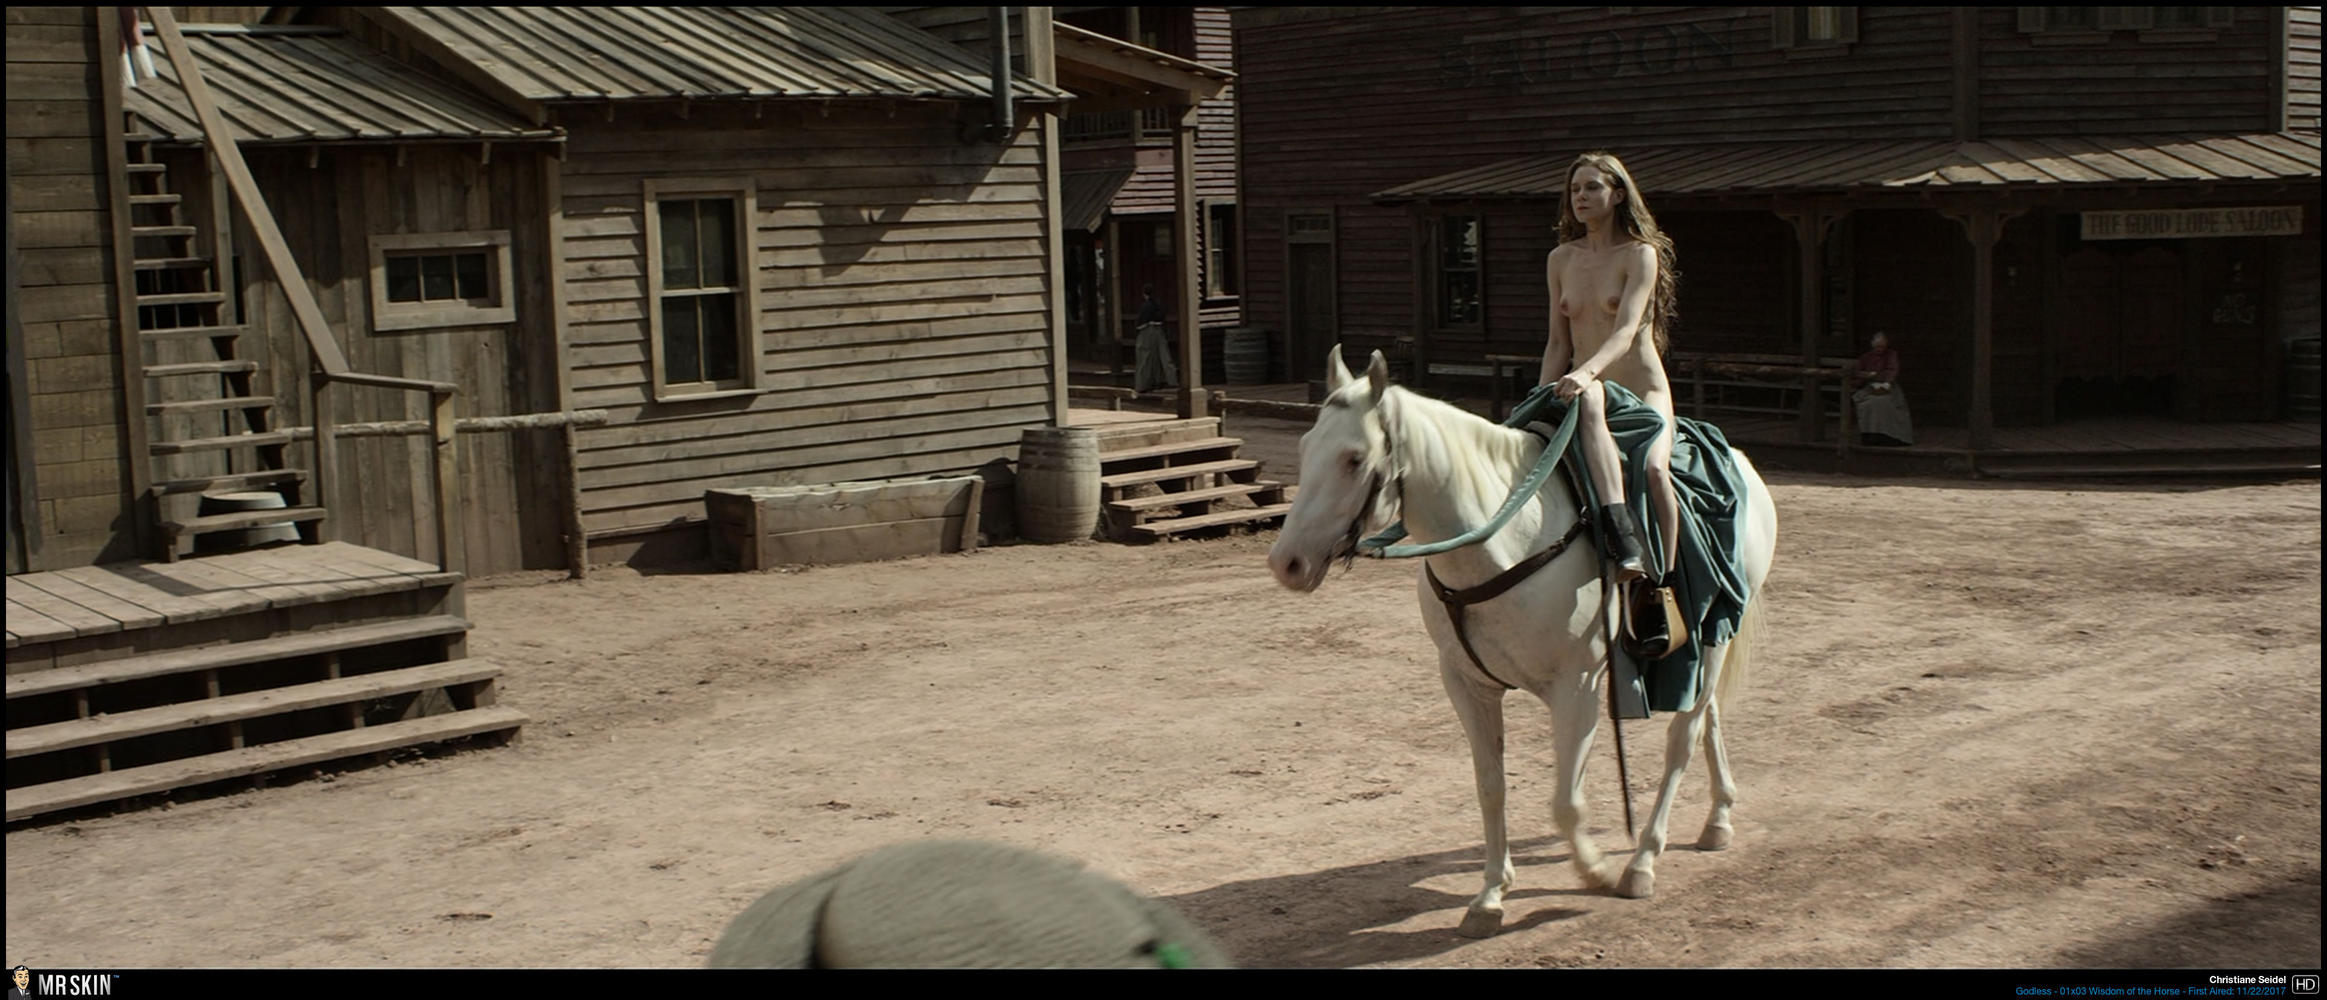 Tv Nudity Report Godless Shes Gotta Have It Shameless The